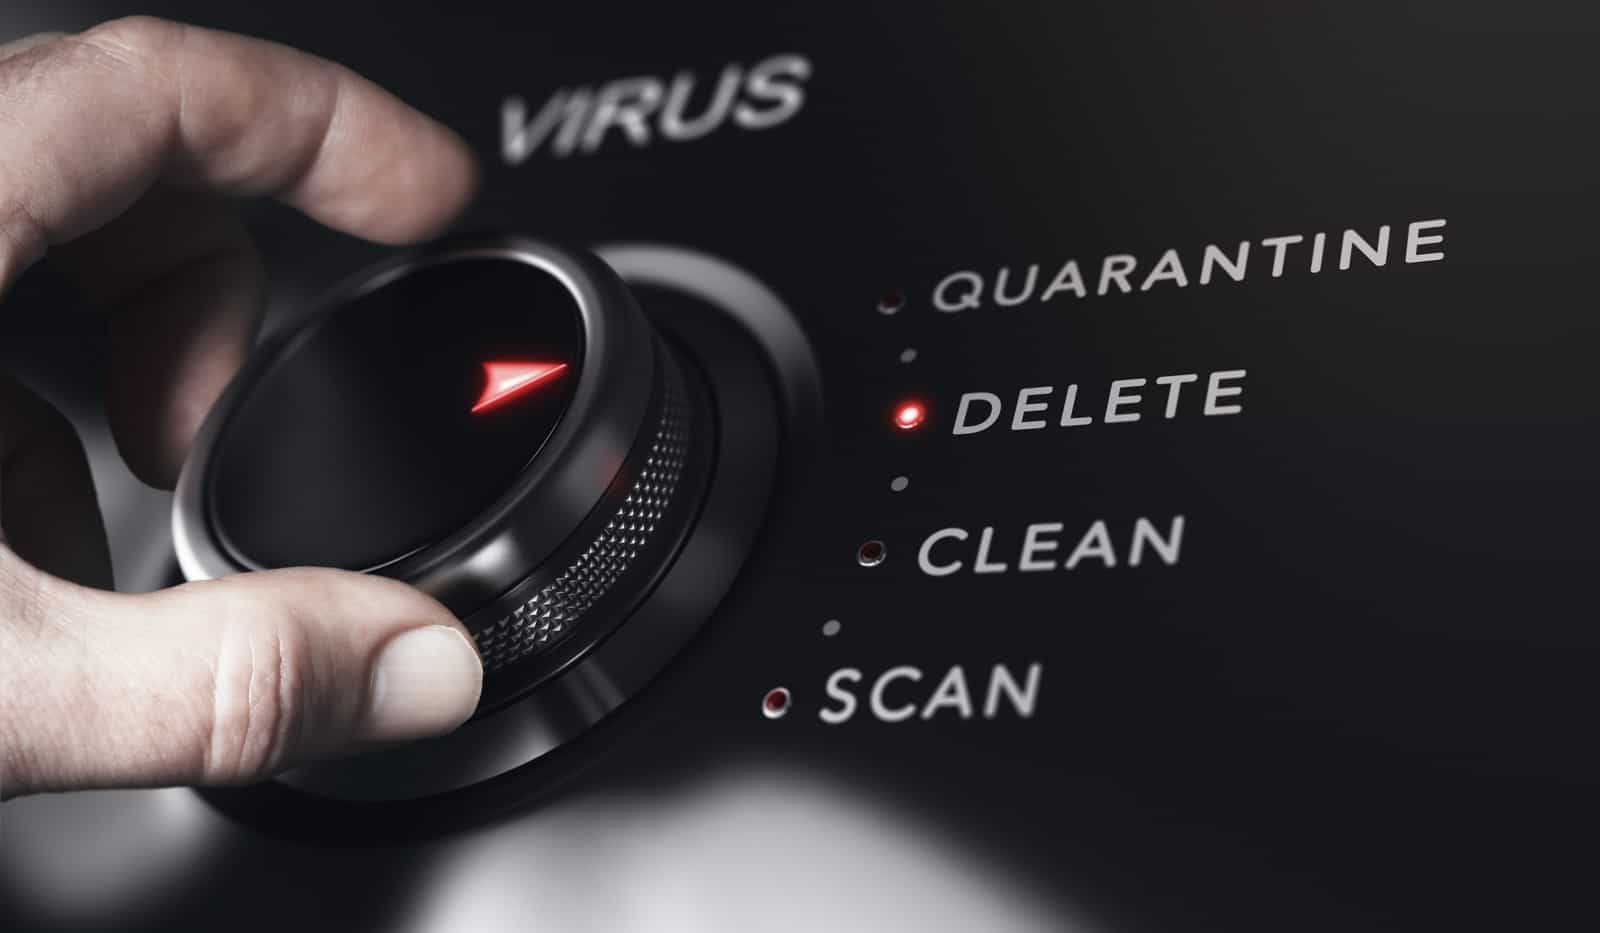 Is It Better To Quarantine Or Delete A Virus?